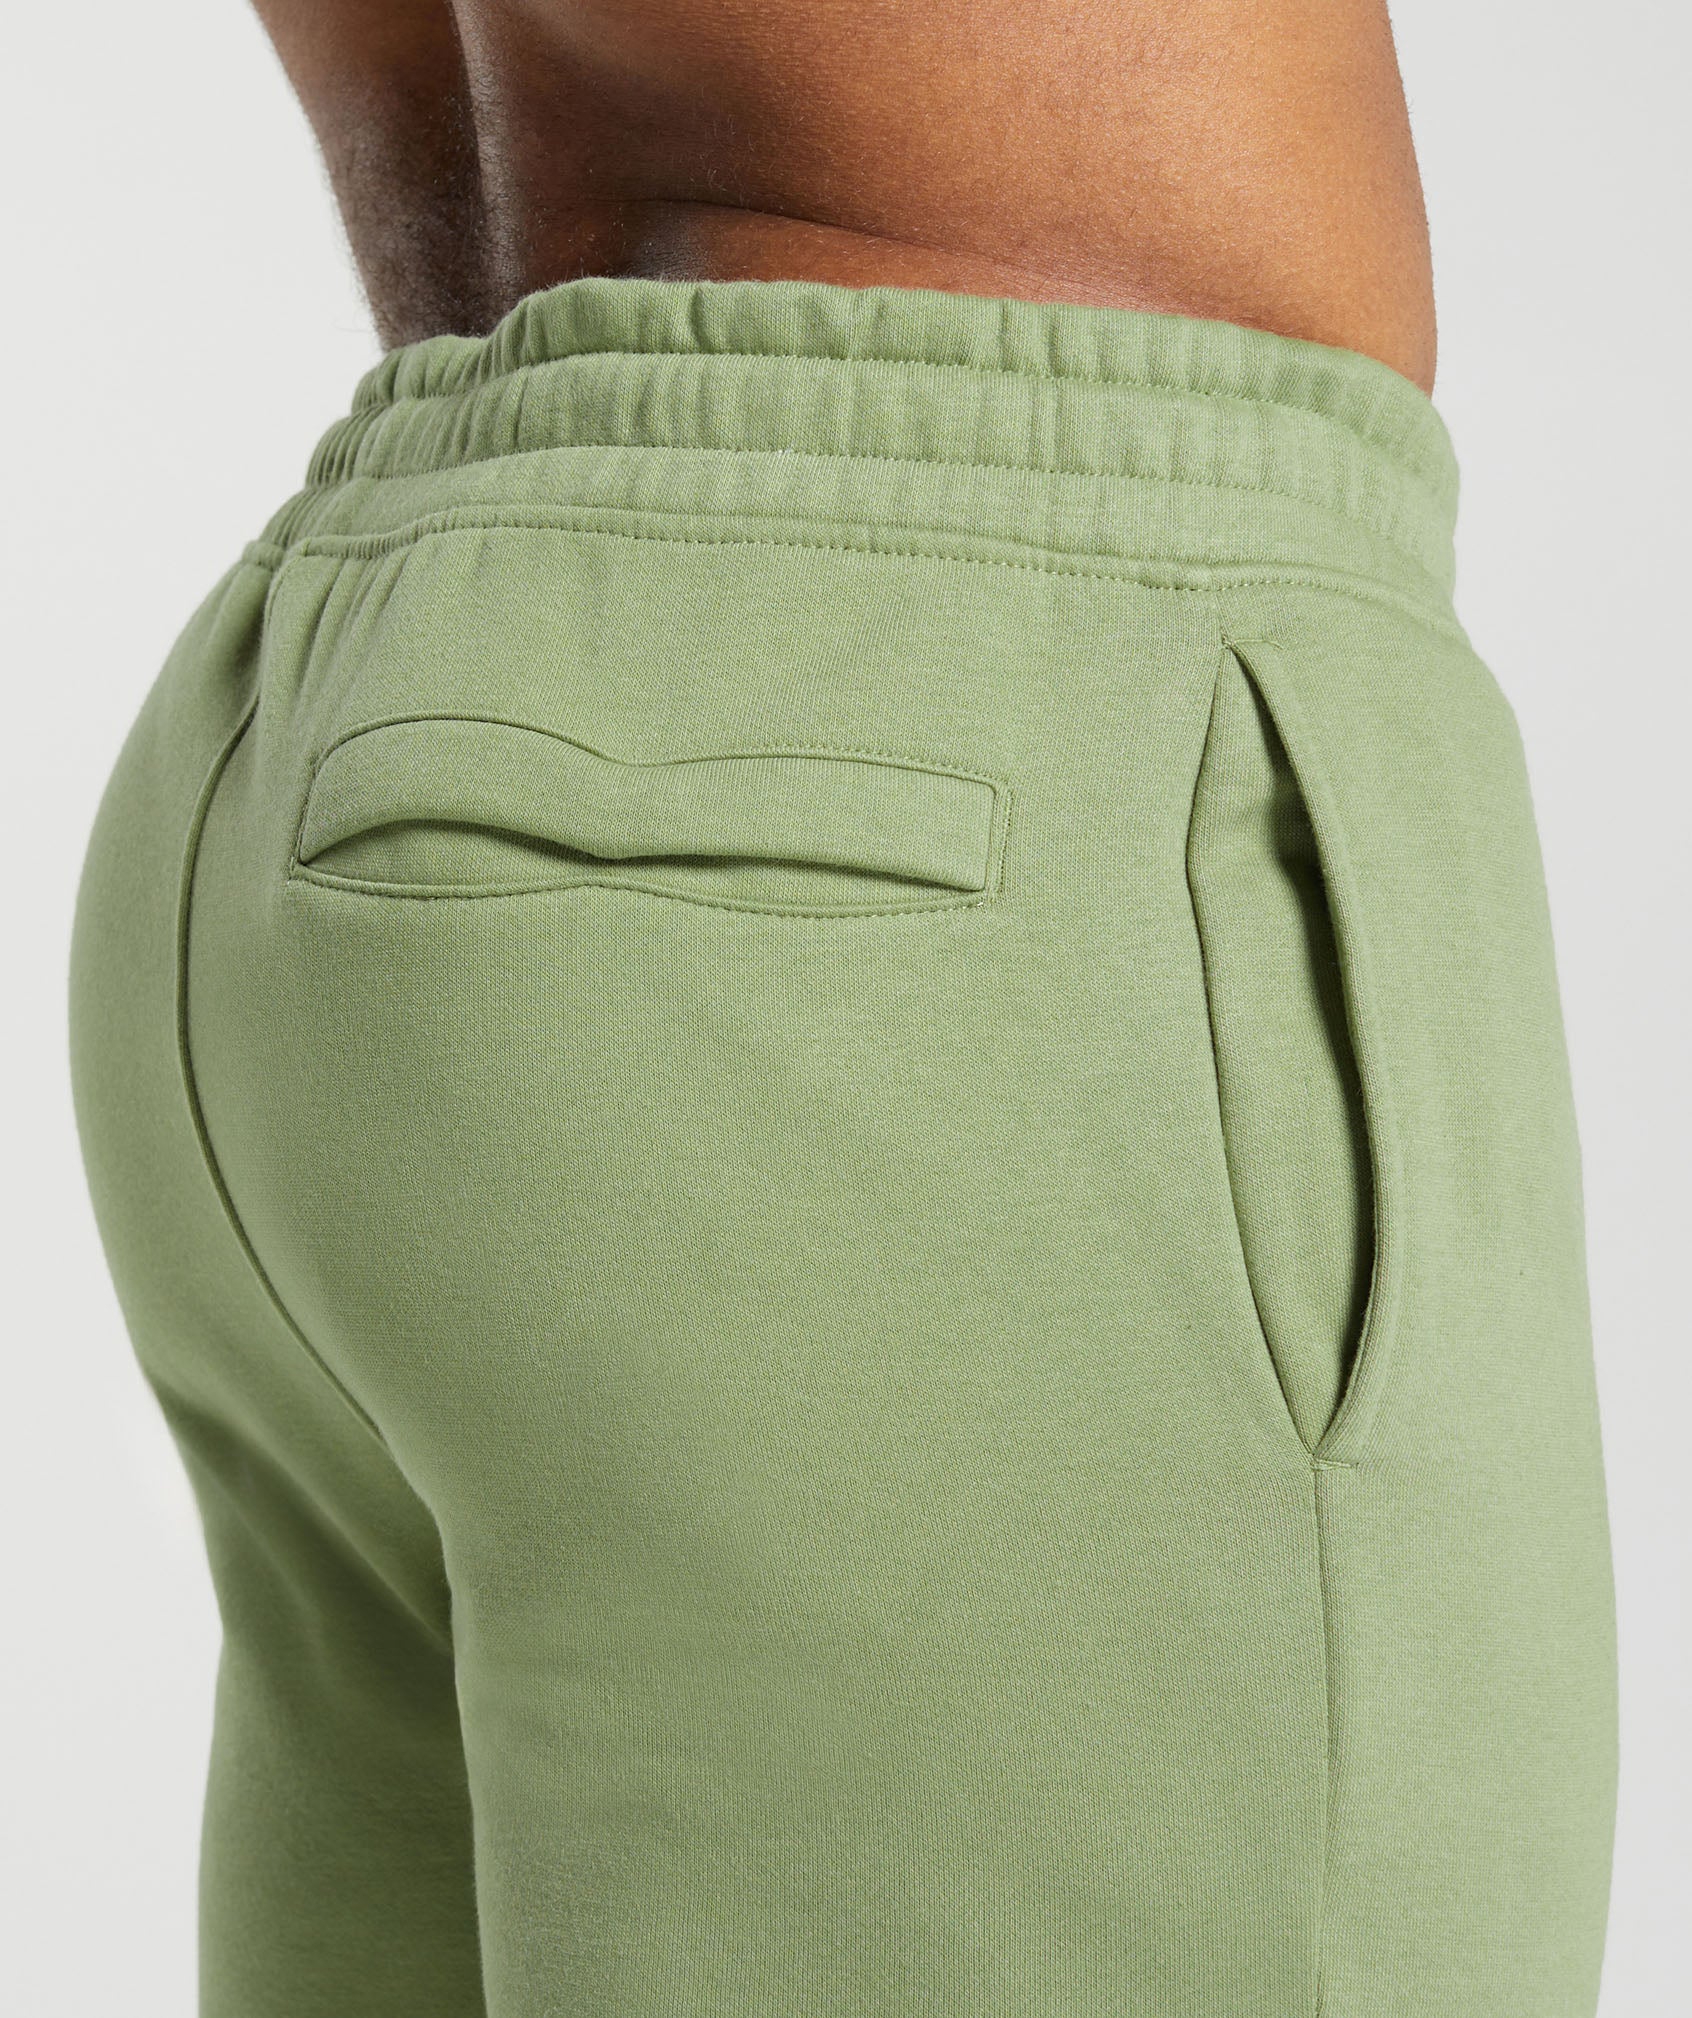 Crest Joggers in Natural Sage Green - view 5